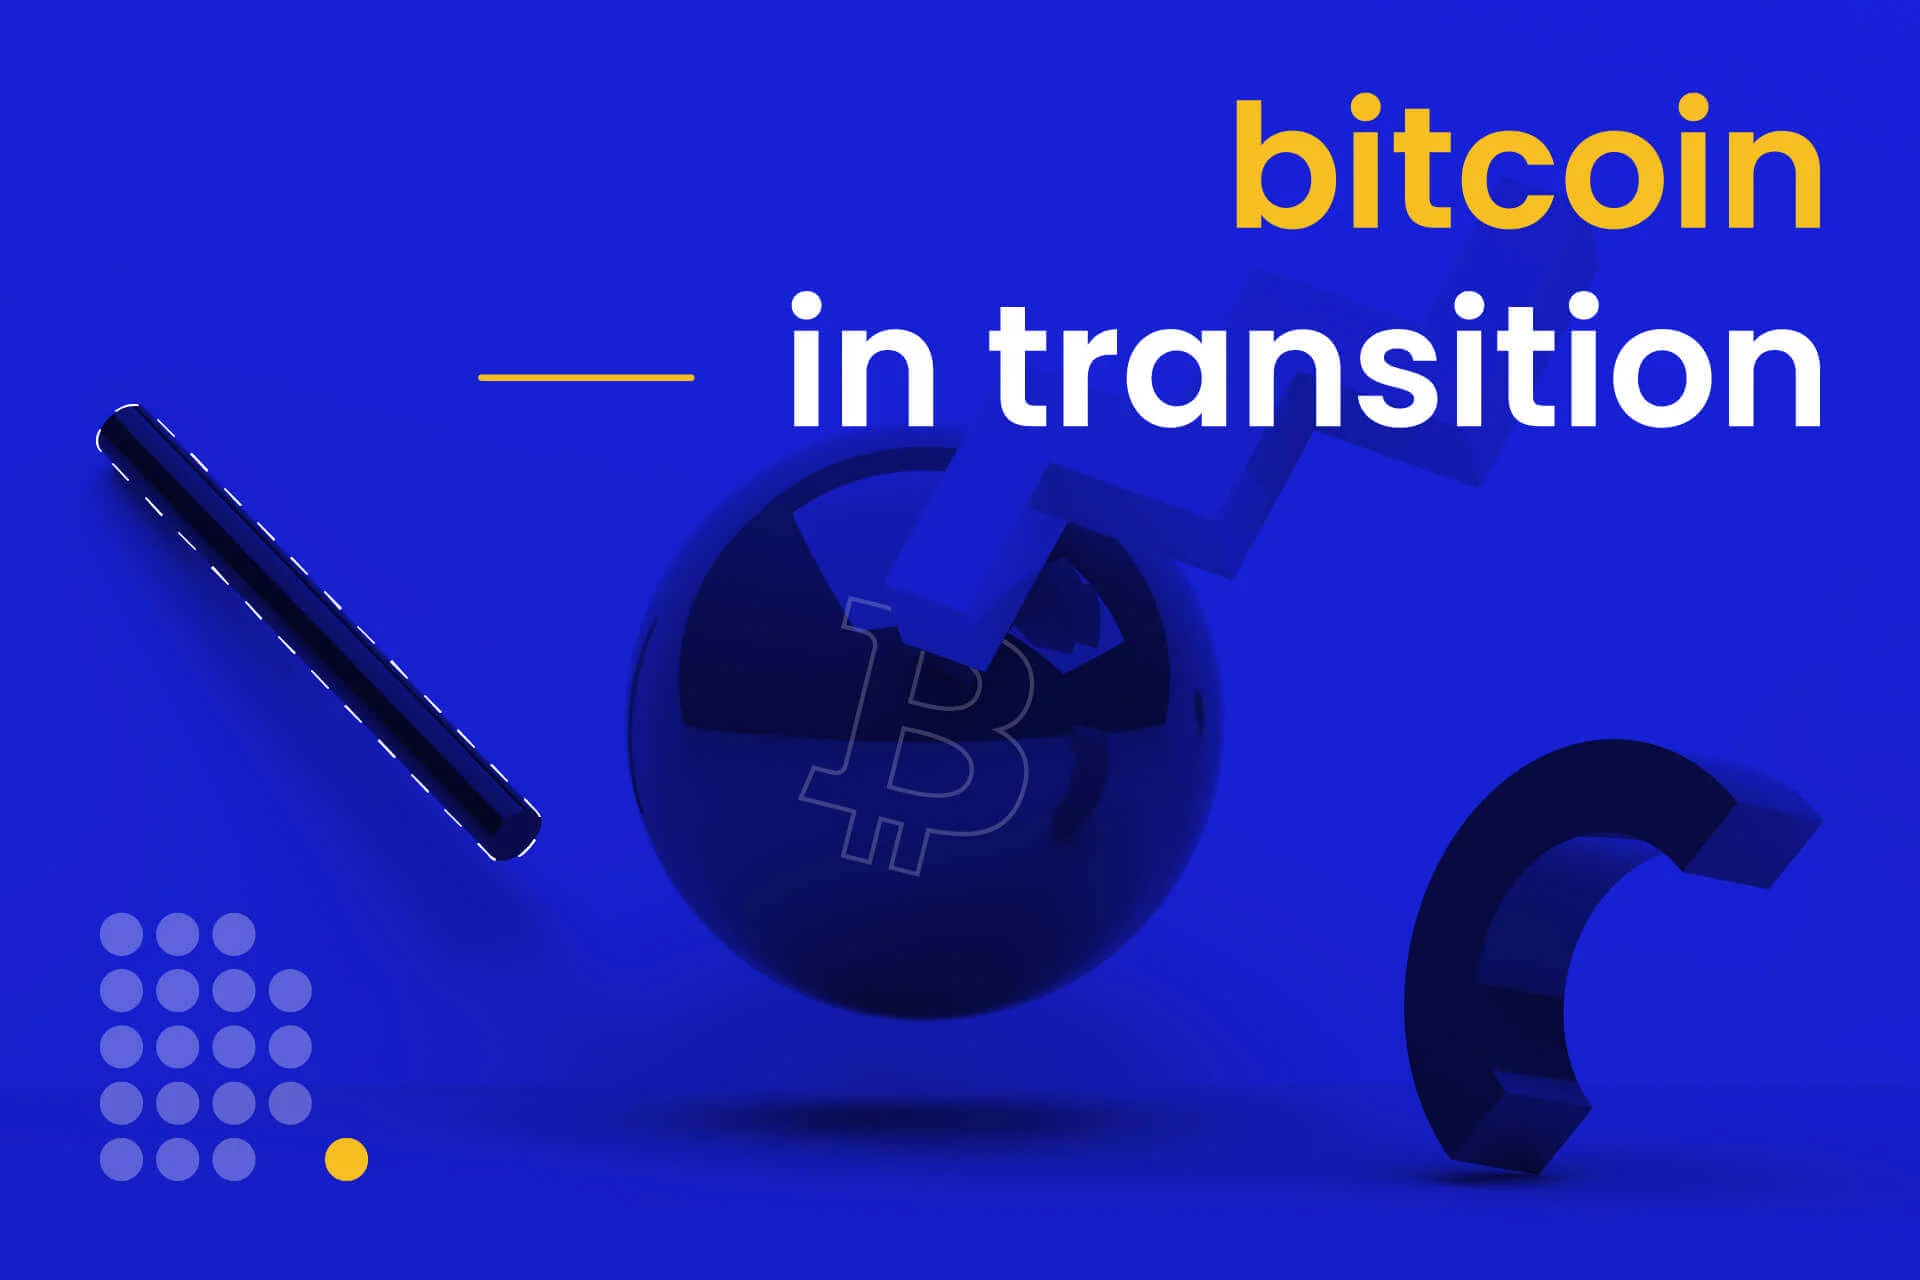 Bitcoin likely to transition